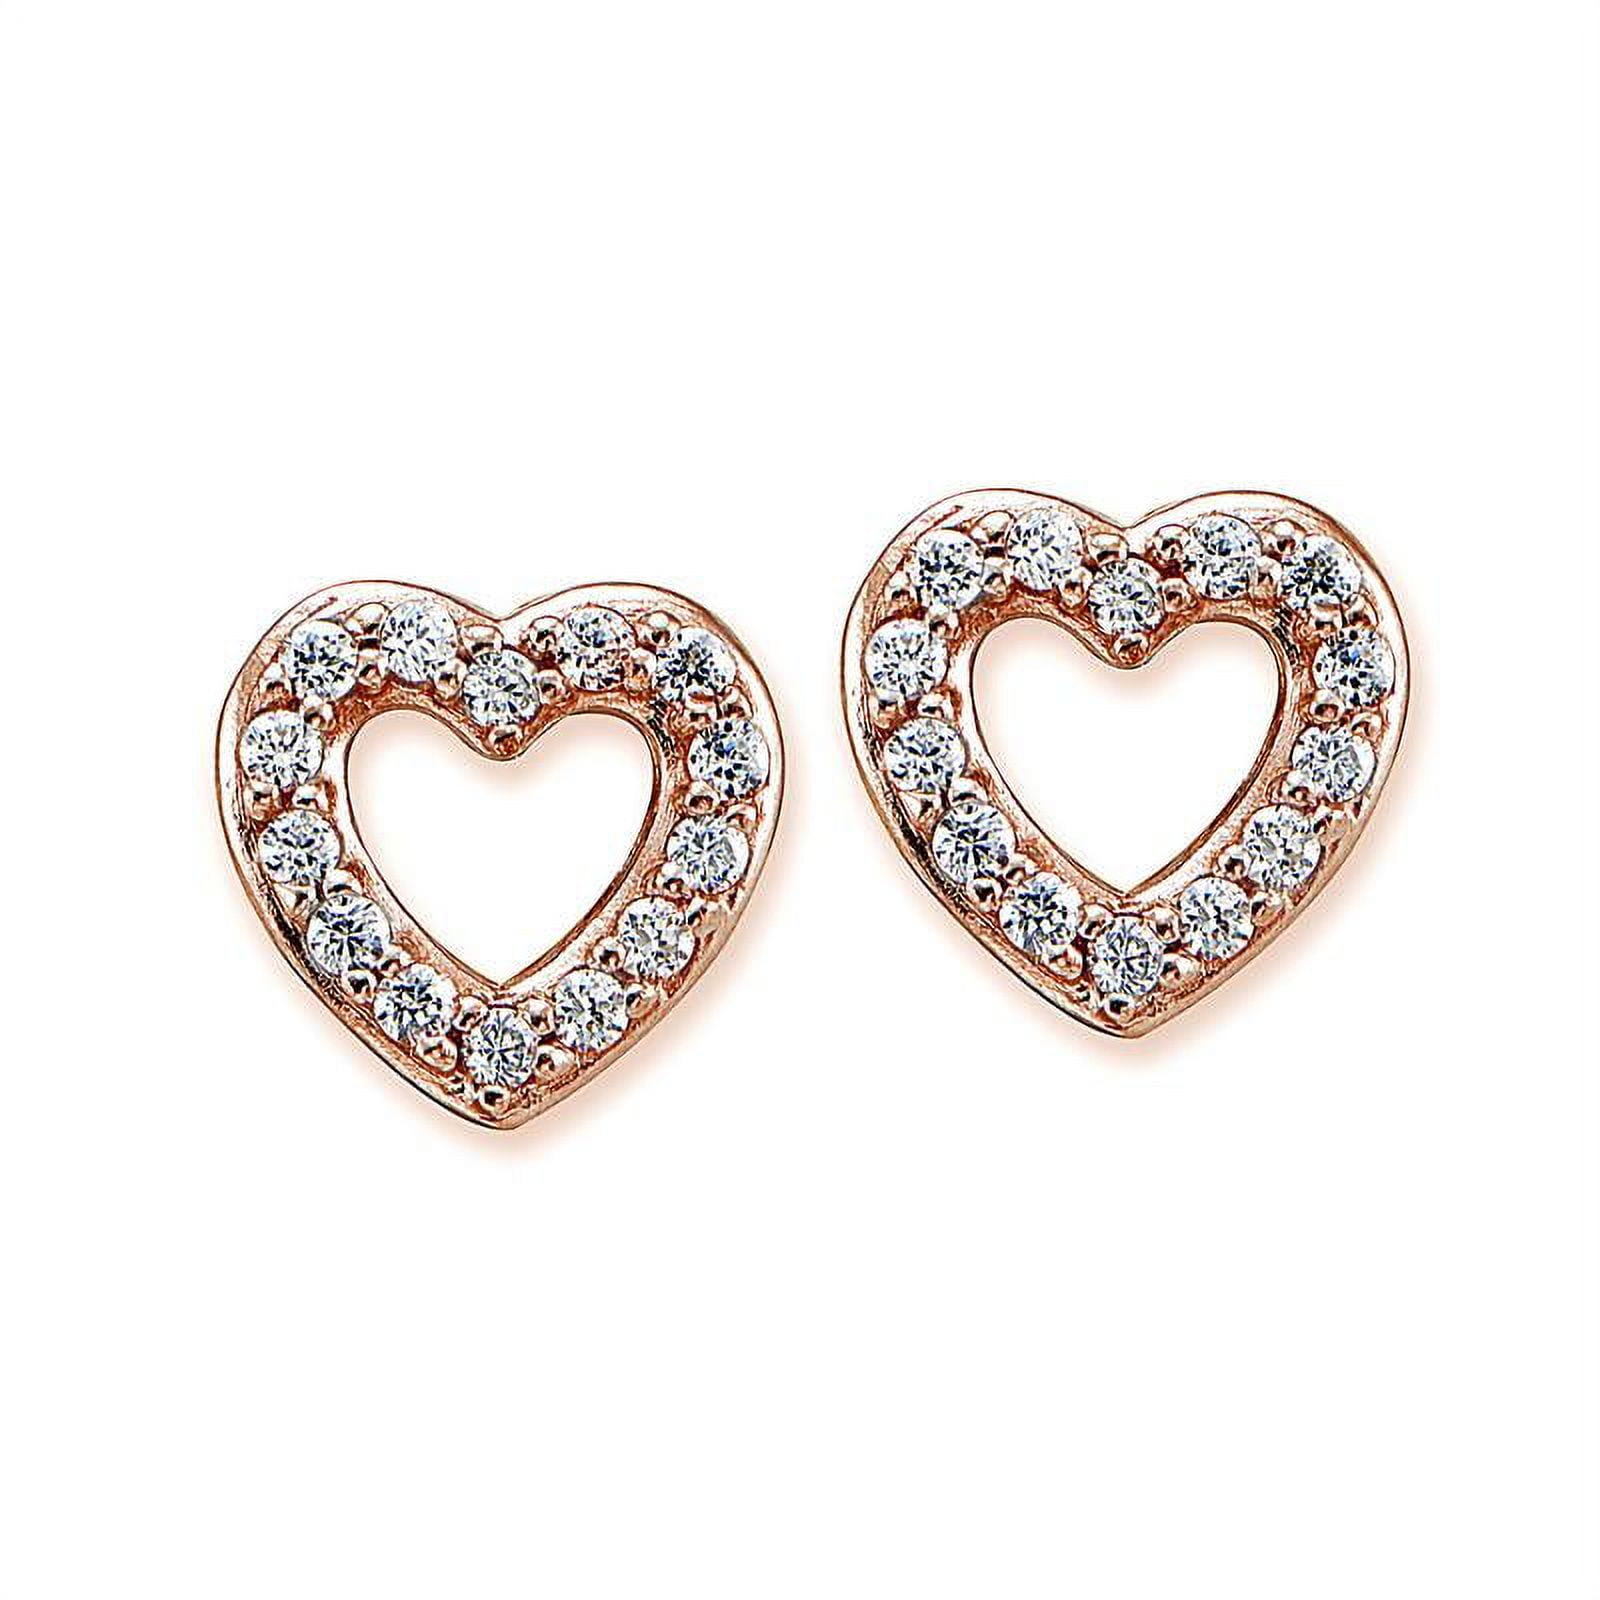 ROSE GOLD PLATED OVER STERLING SILVER CZ HEART STUD EARRINGS - Walmart.com